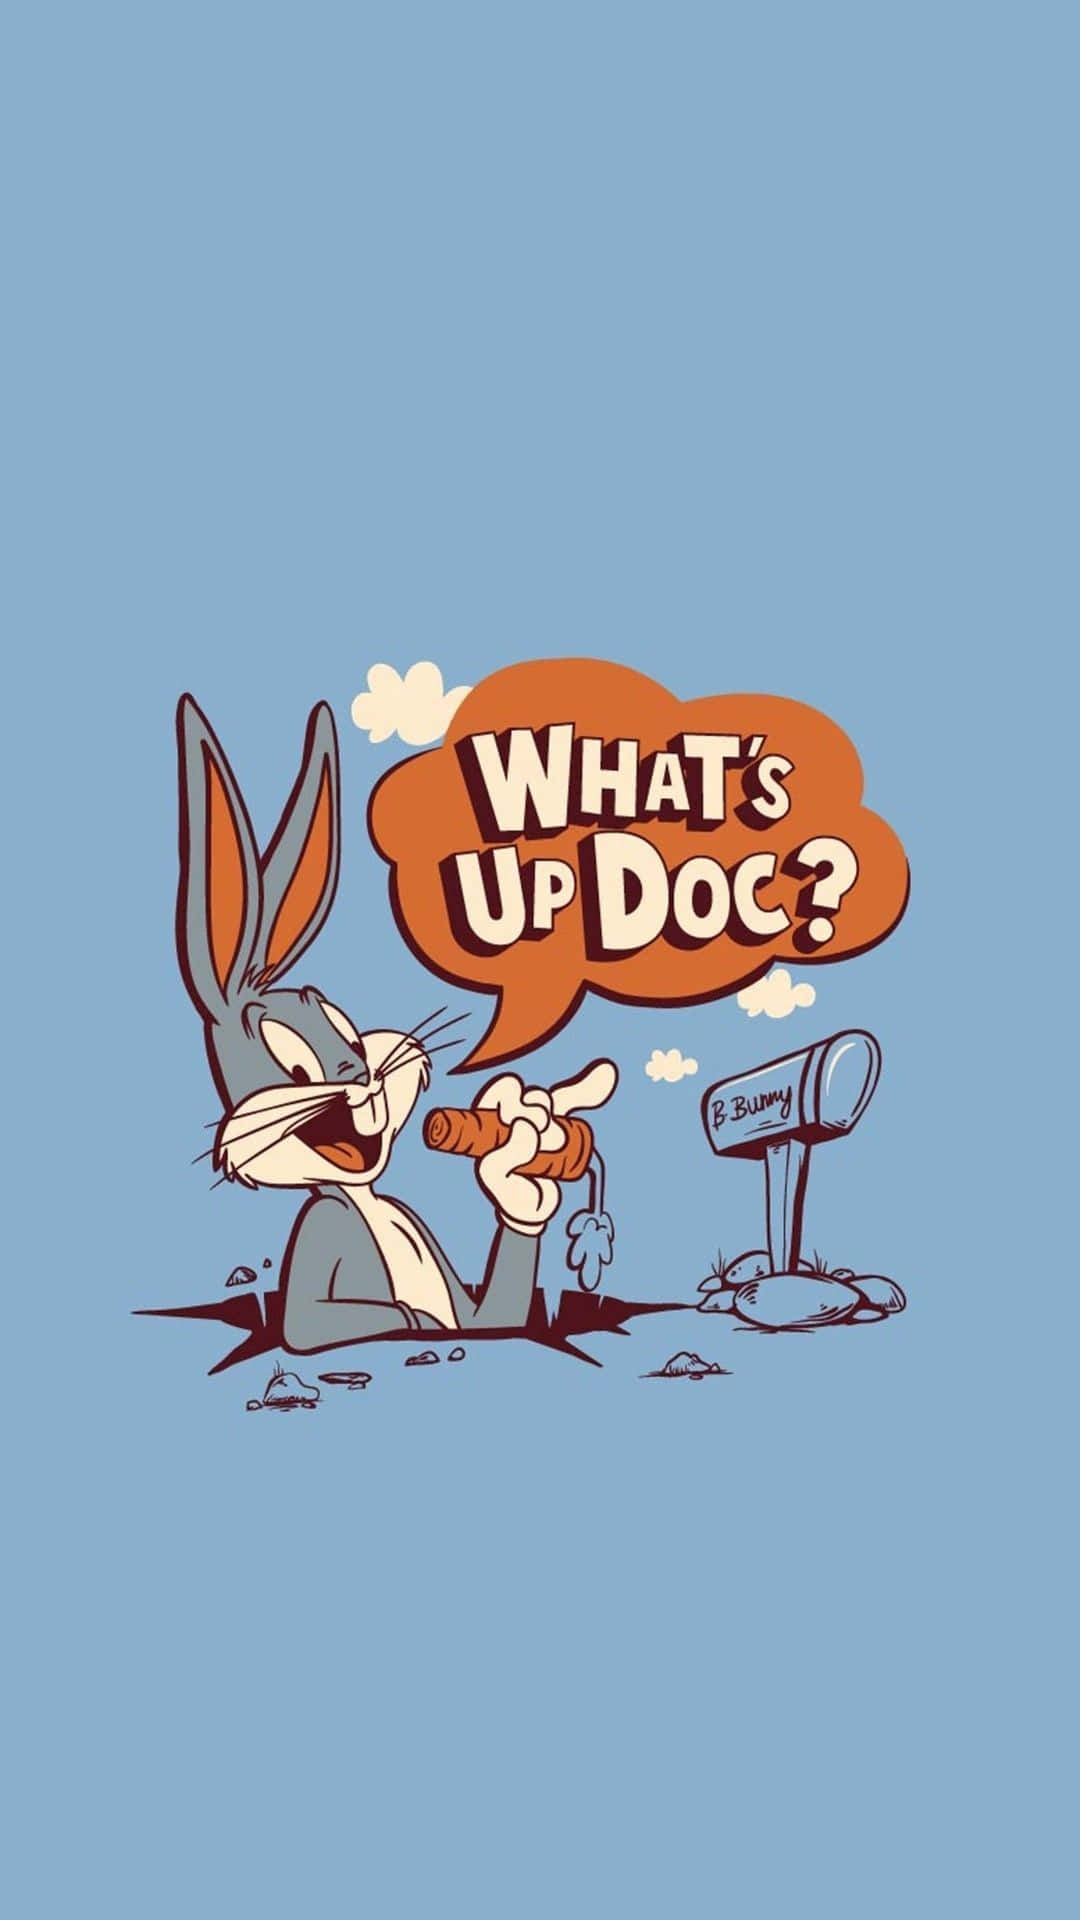 Free Bugs Bunny iPhone Wallpaper Downloads, Bugs Bunny iPhone Wallpaper for FREE